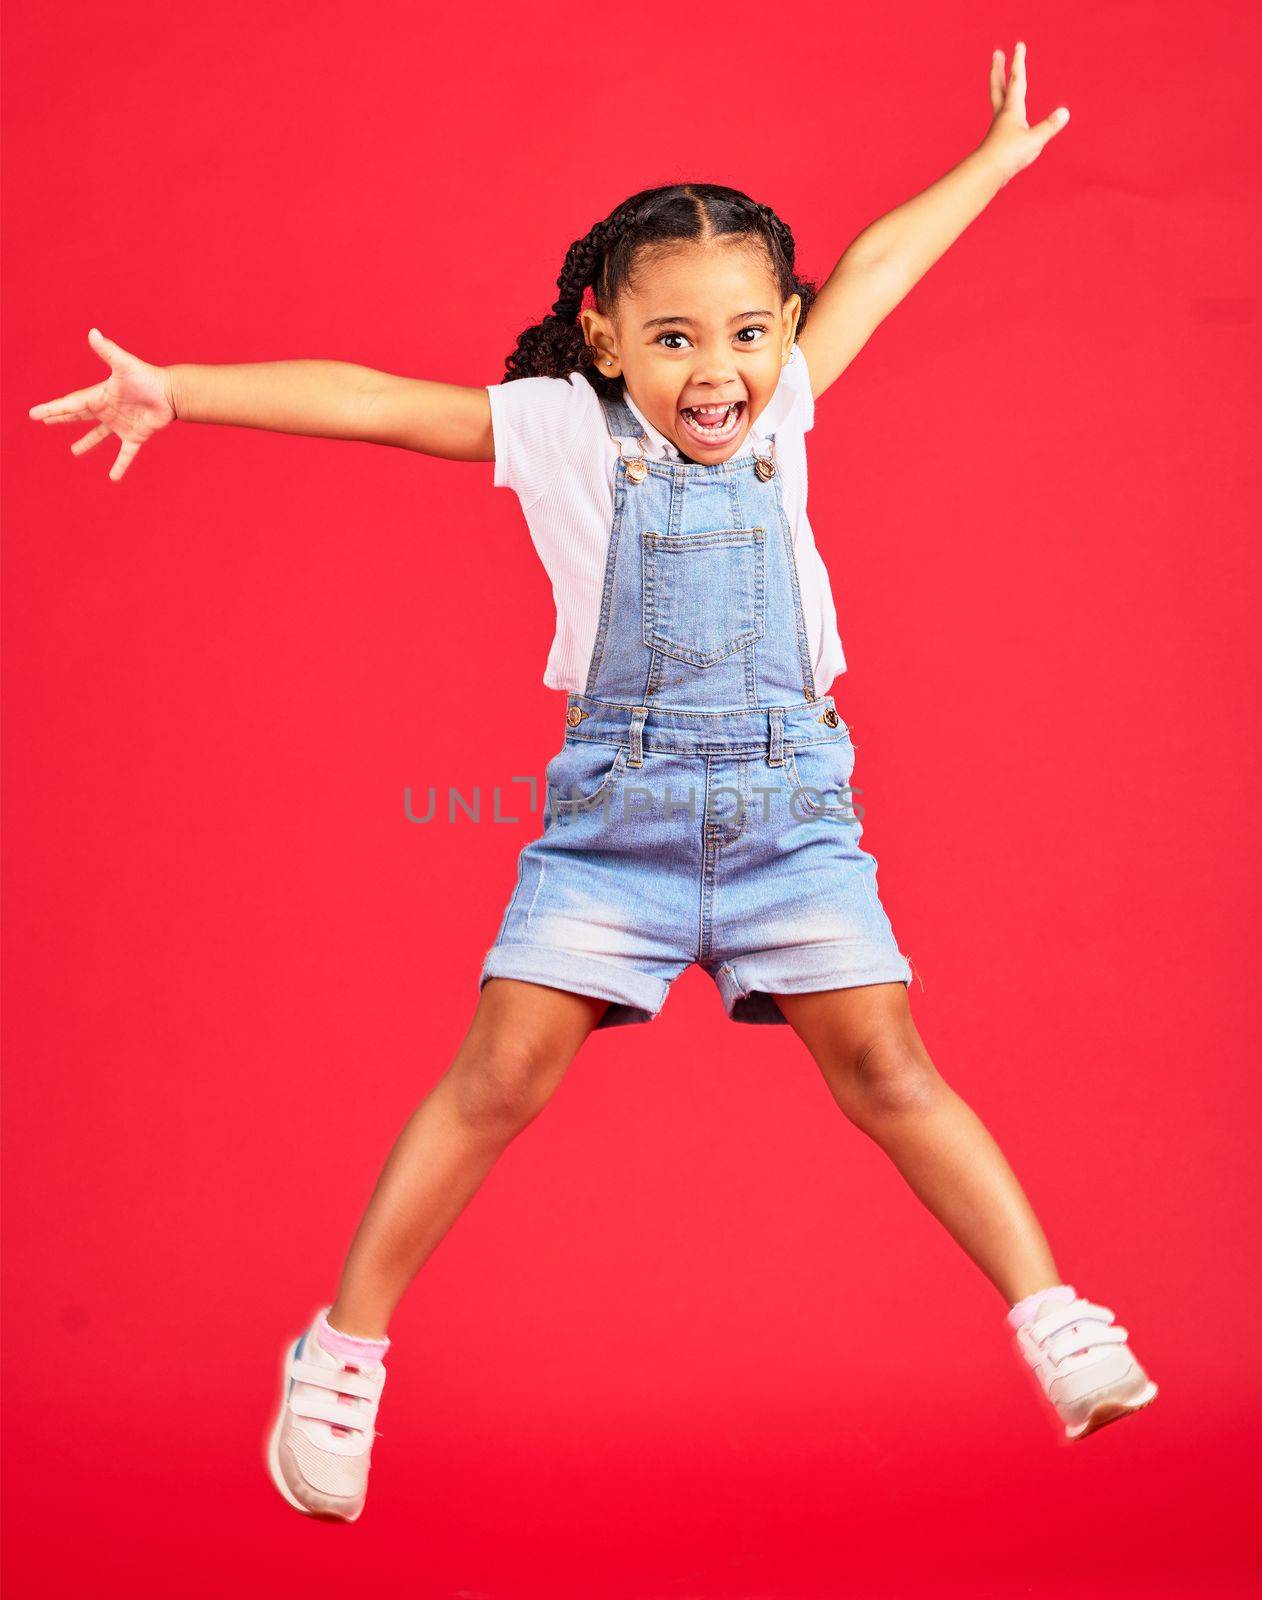 Excited, playful and portrait of a girl jumping while isolated on a red background in a studio. Youth, smile and child with freedom, energy and happiness while playing with a jump on a backdrop by YuriArcurs